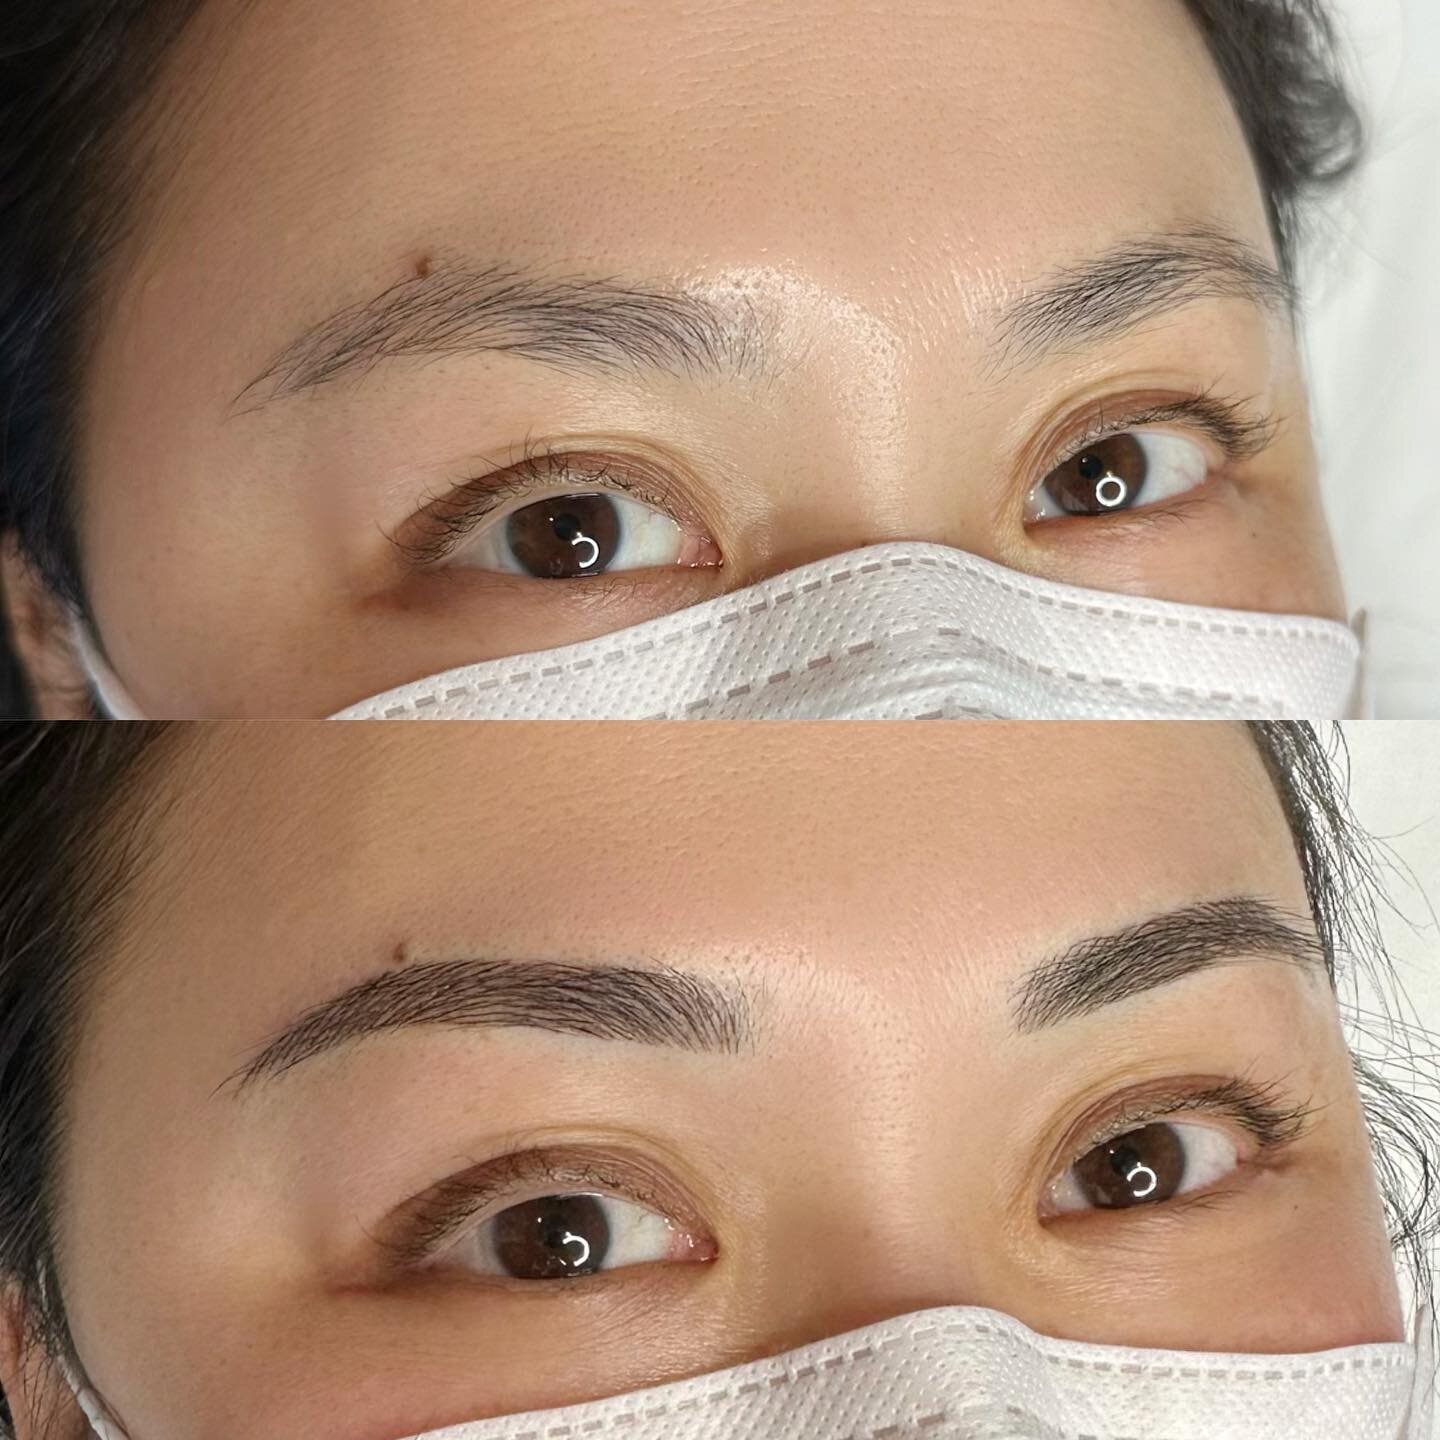 Brows groomed and feathered 🥰 #nanofeathering 
&mdash;
Skin type: Combination
Technique: Nano Feather Brows
Pain level: None
Appointment time: 2 hours
Sessions: 2 required
Healing time: 7-10 days (no scabbing)
Last: 2-3 years (depends on skin type)
